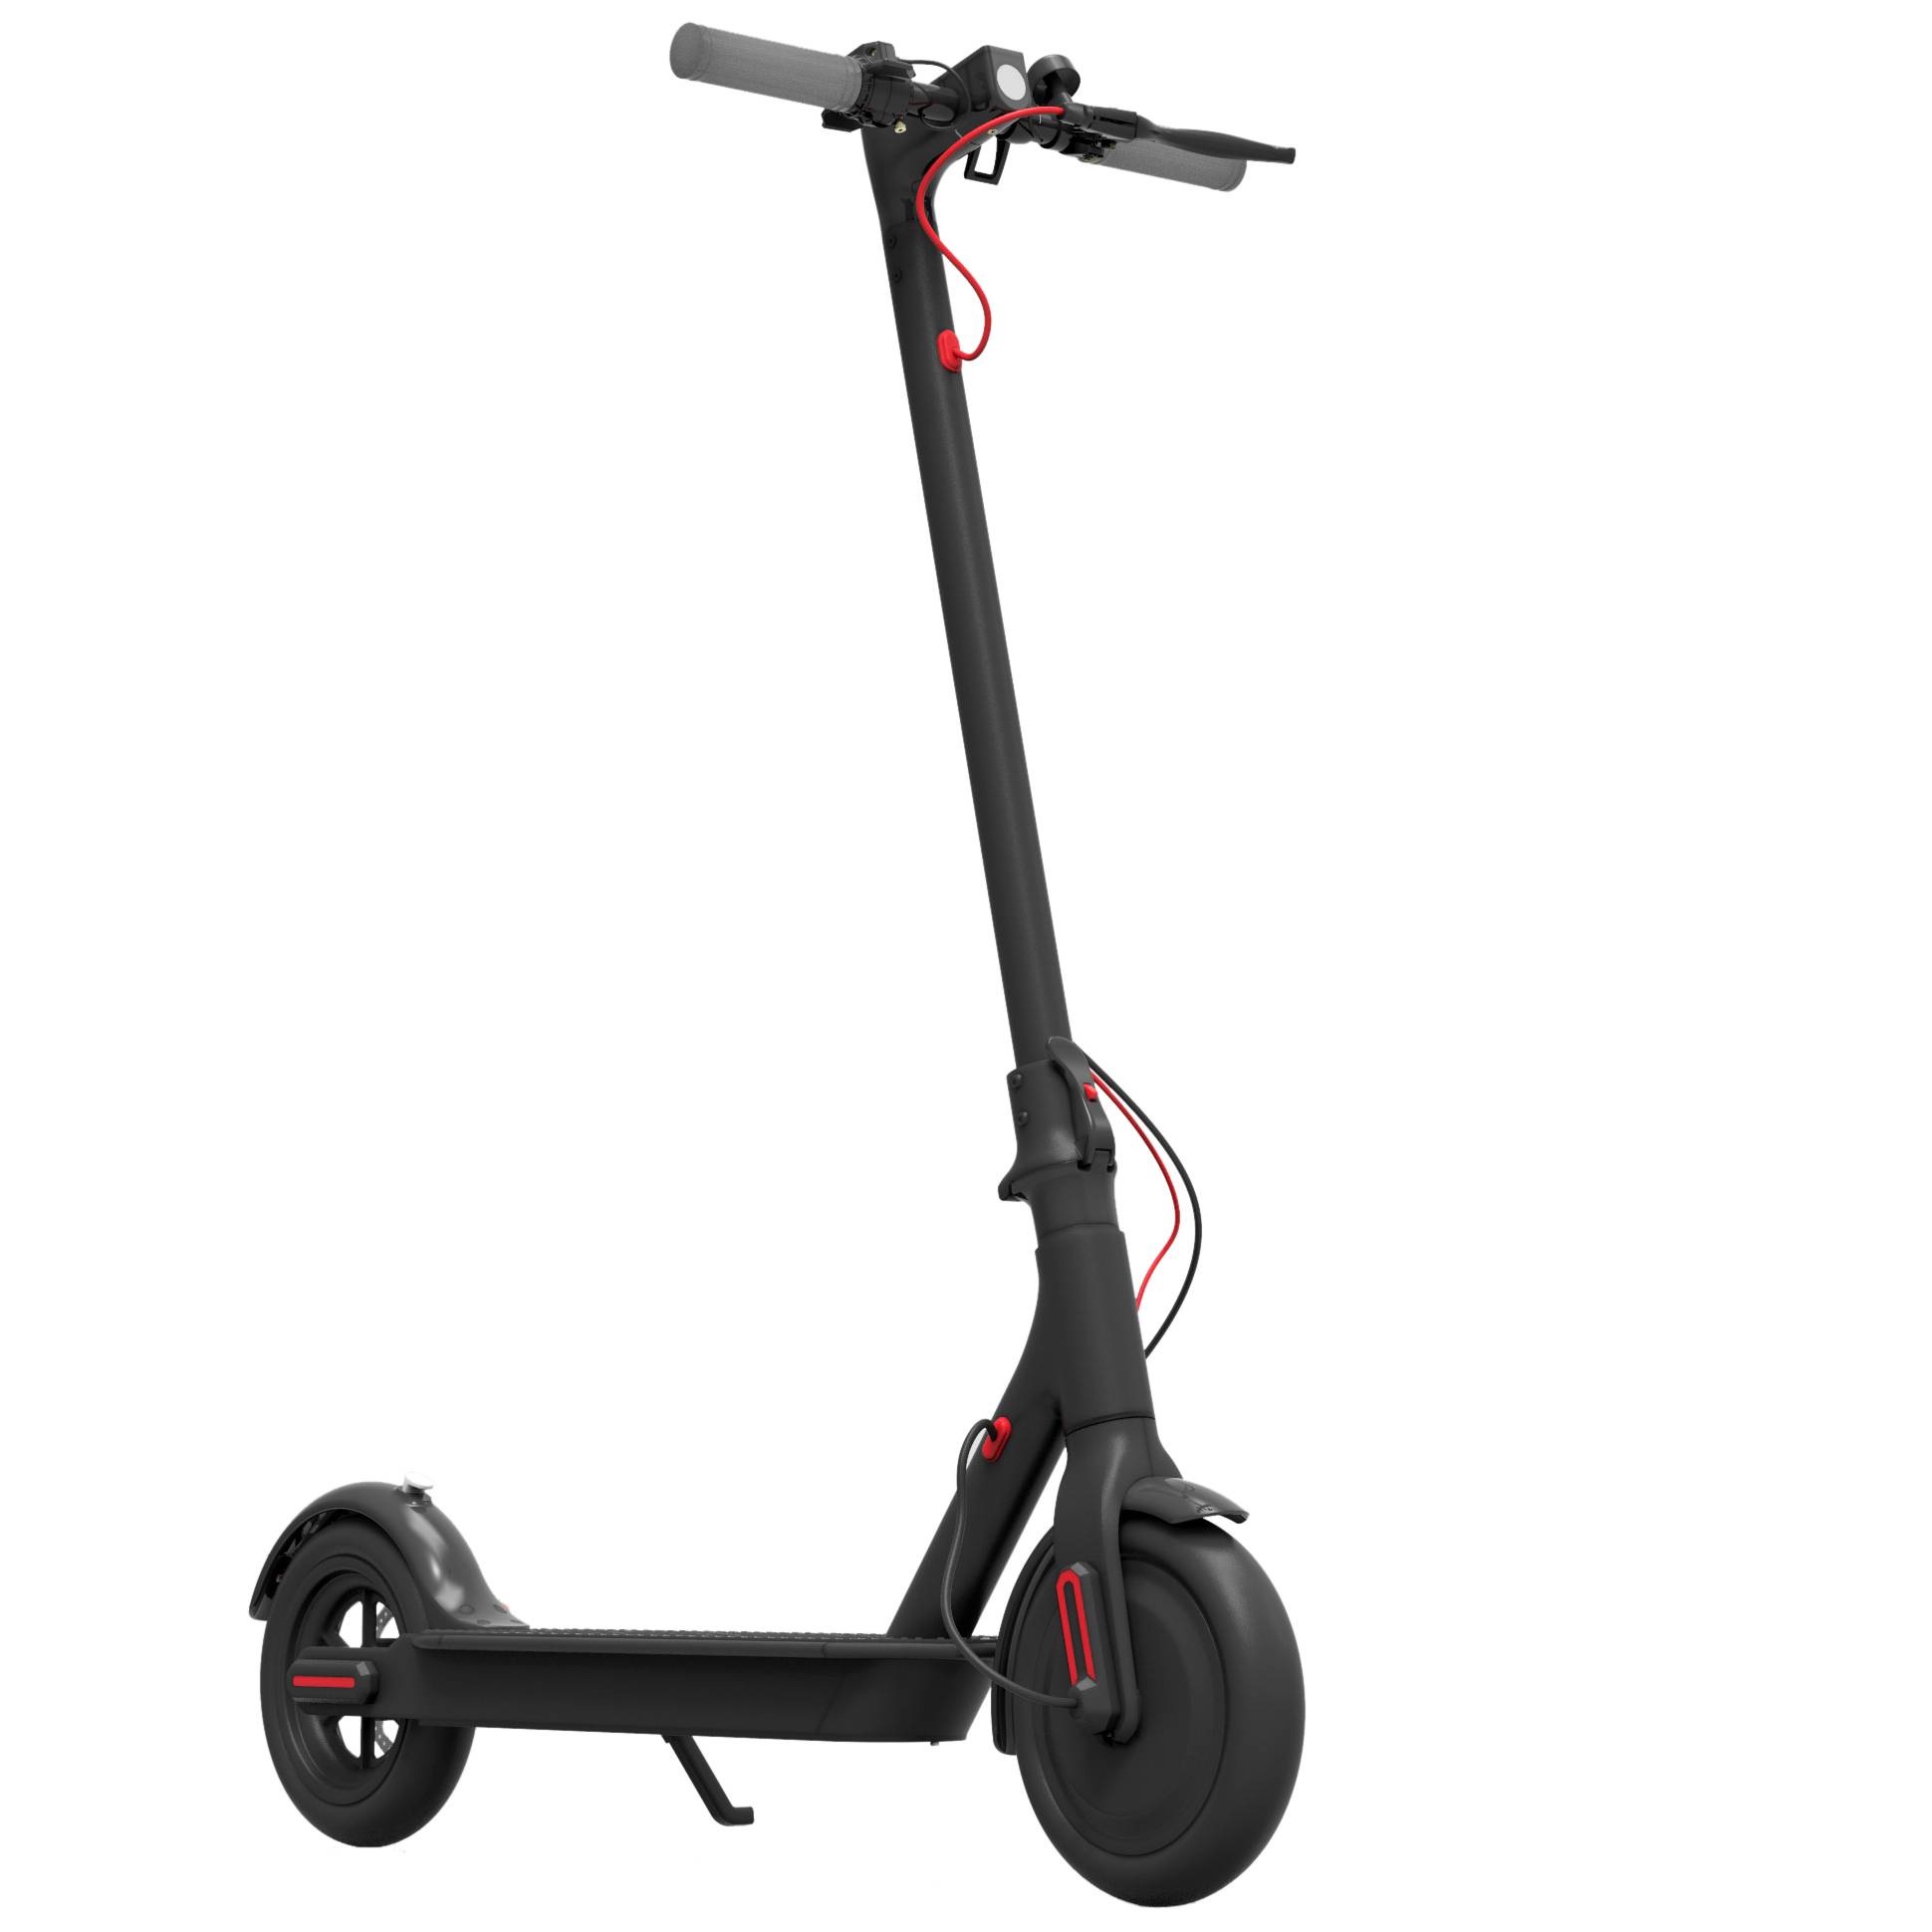 Ordinary Discount Powerful Electric Scooter -
 M6 Public Tooling Strong 8.5 inch Black Electric Scooter – Vitek